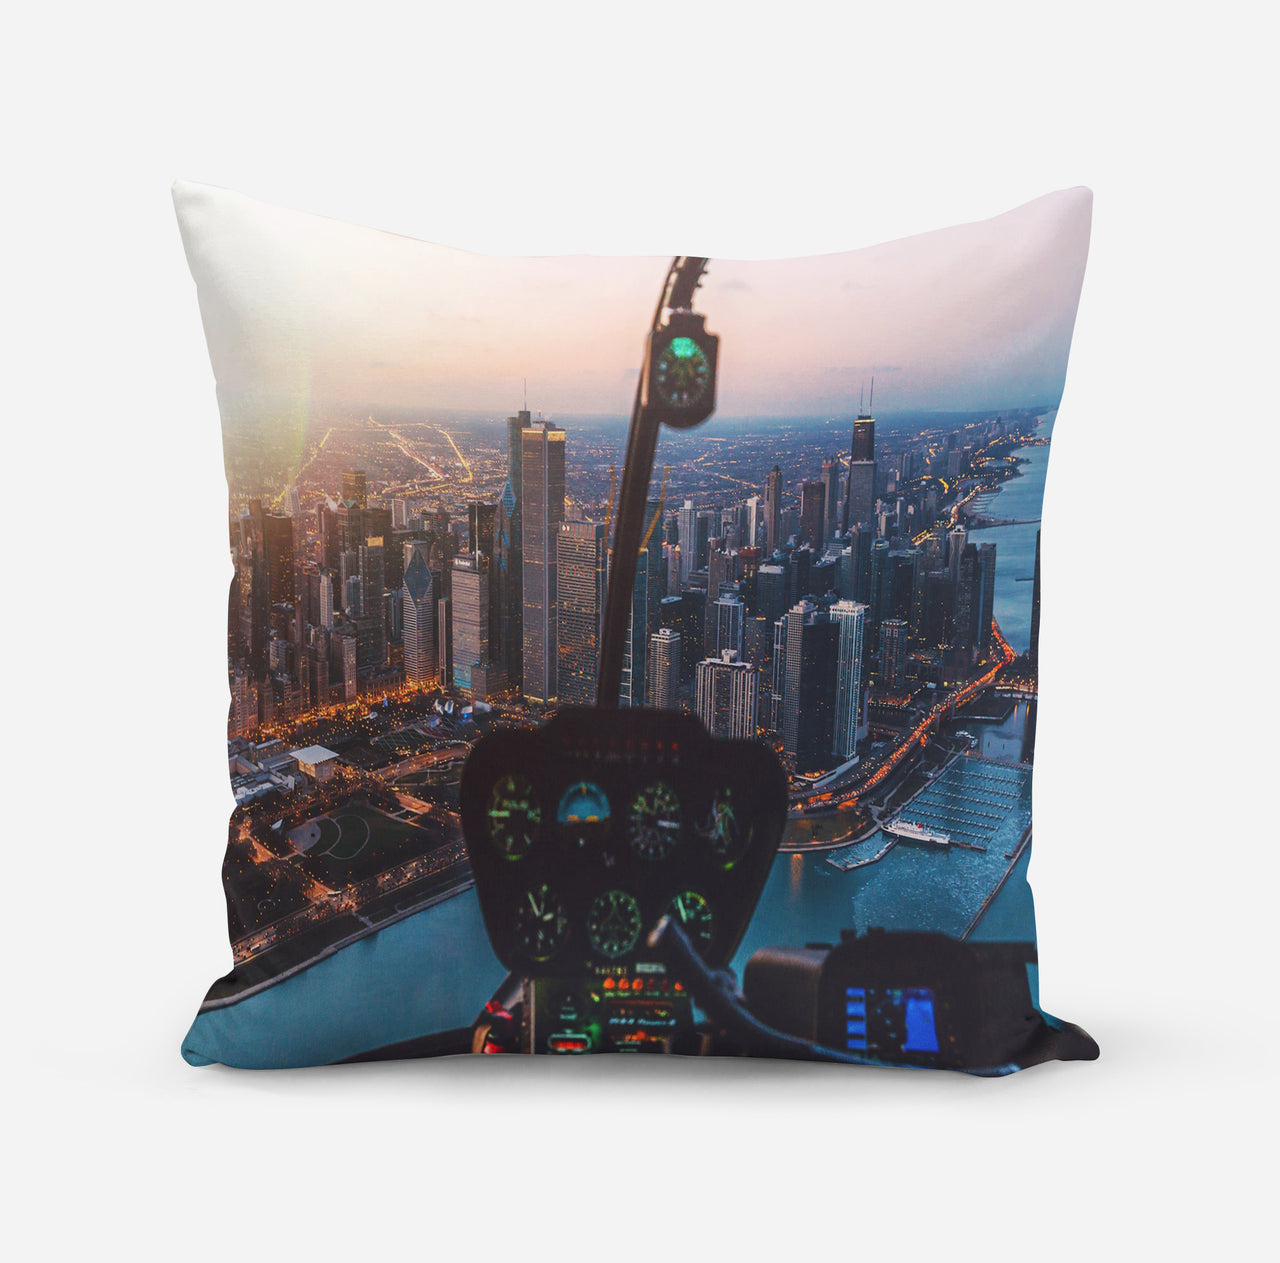 Amazing City View from Helicopter Cockpit Designed Pillows